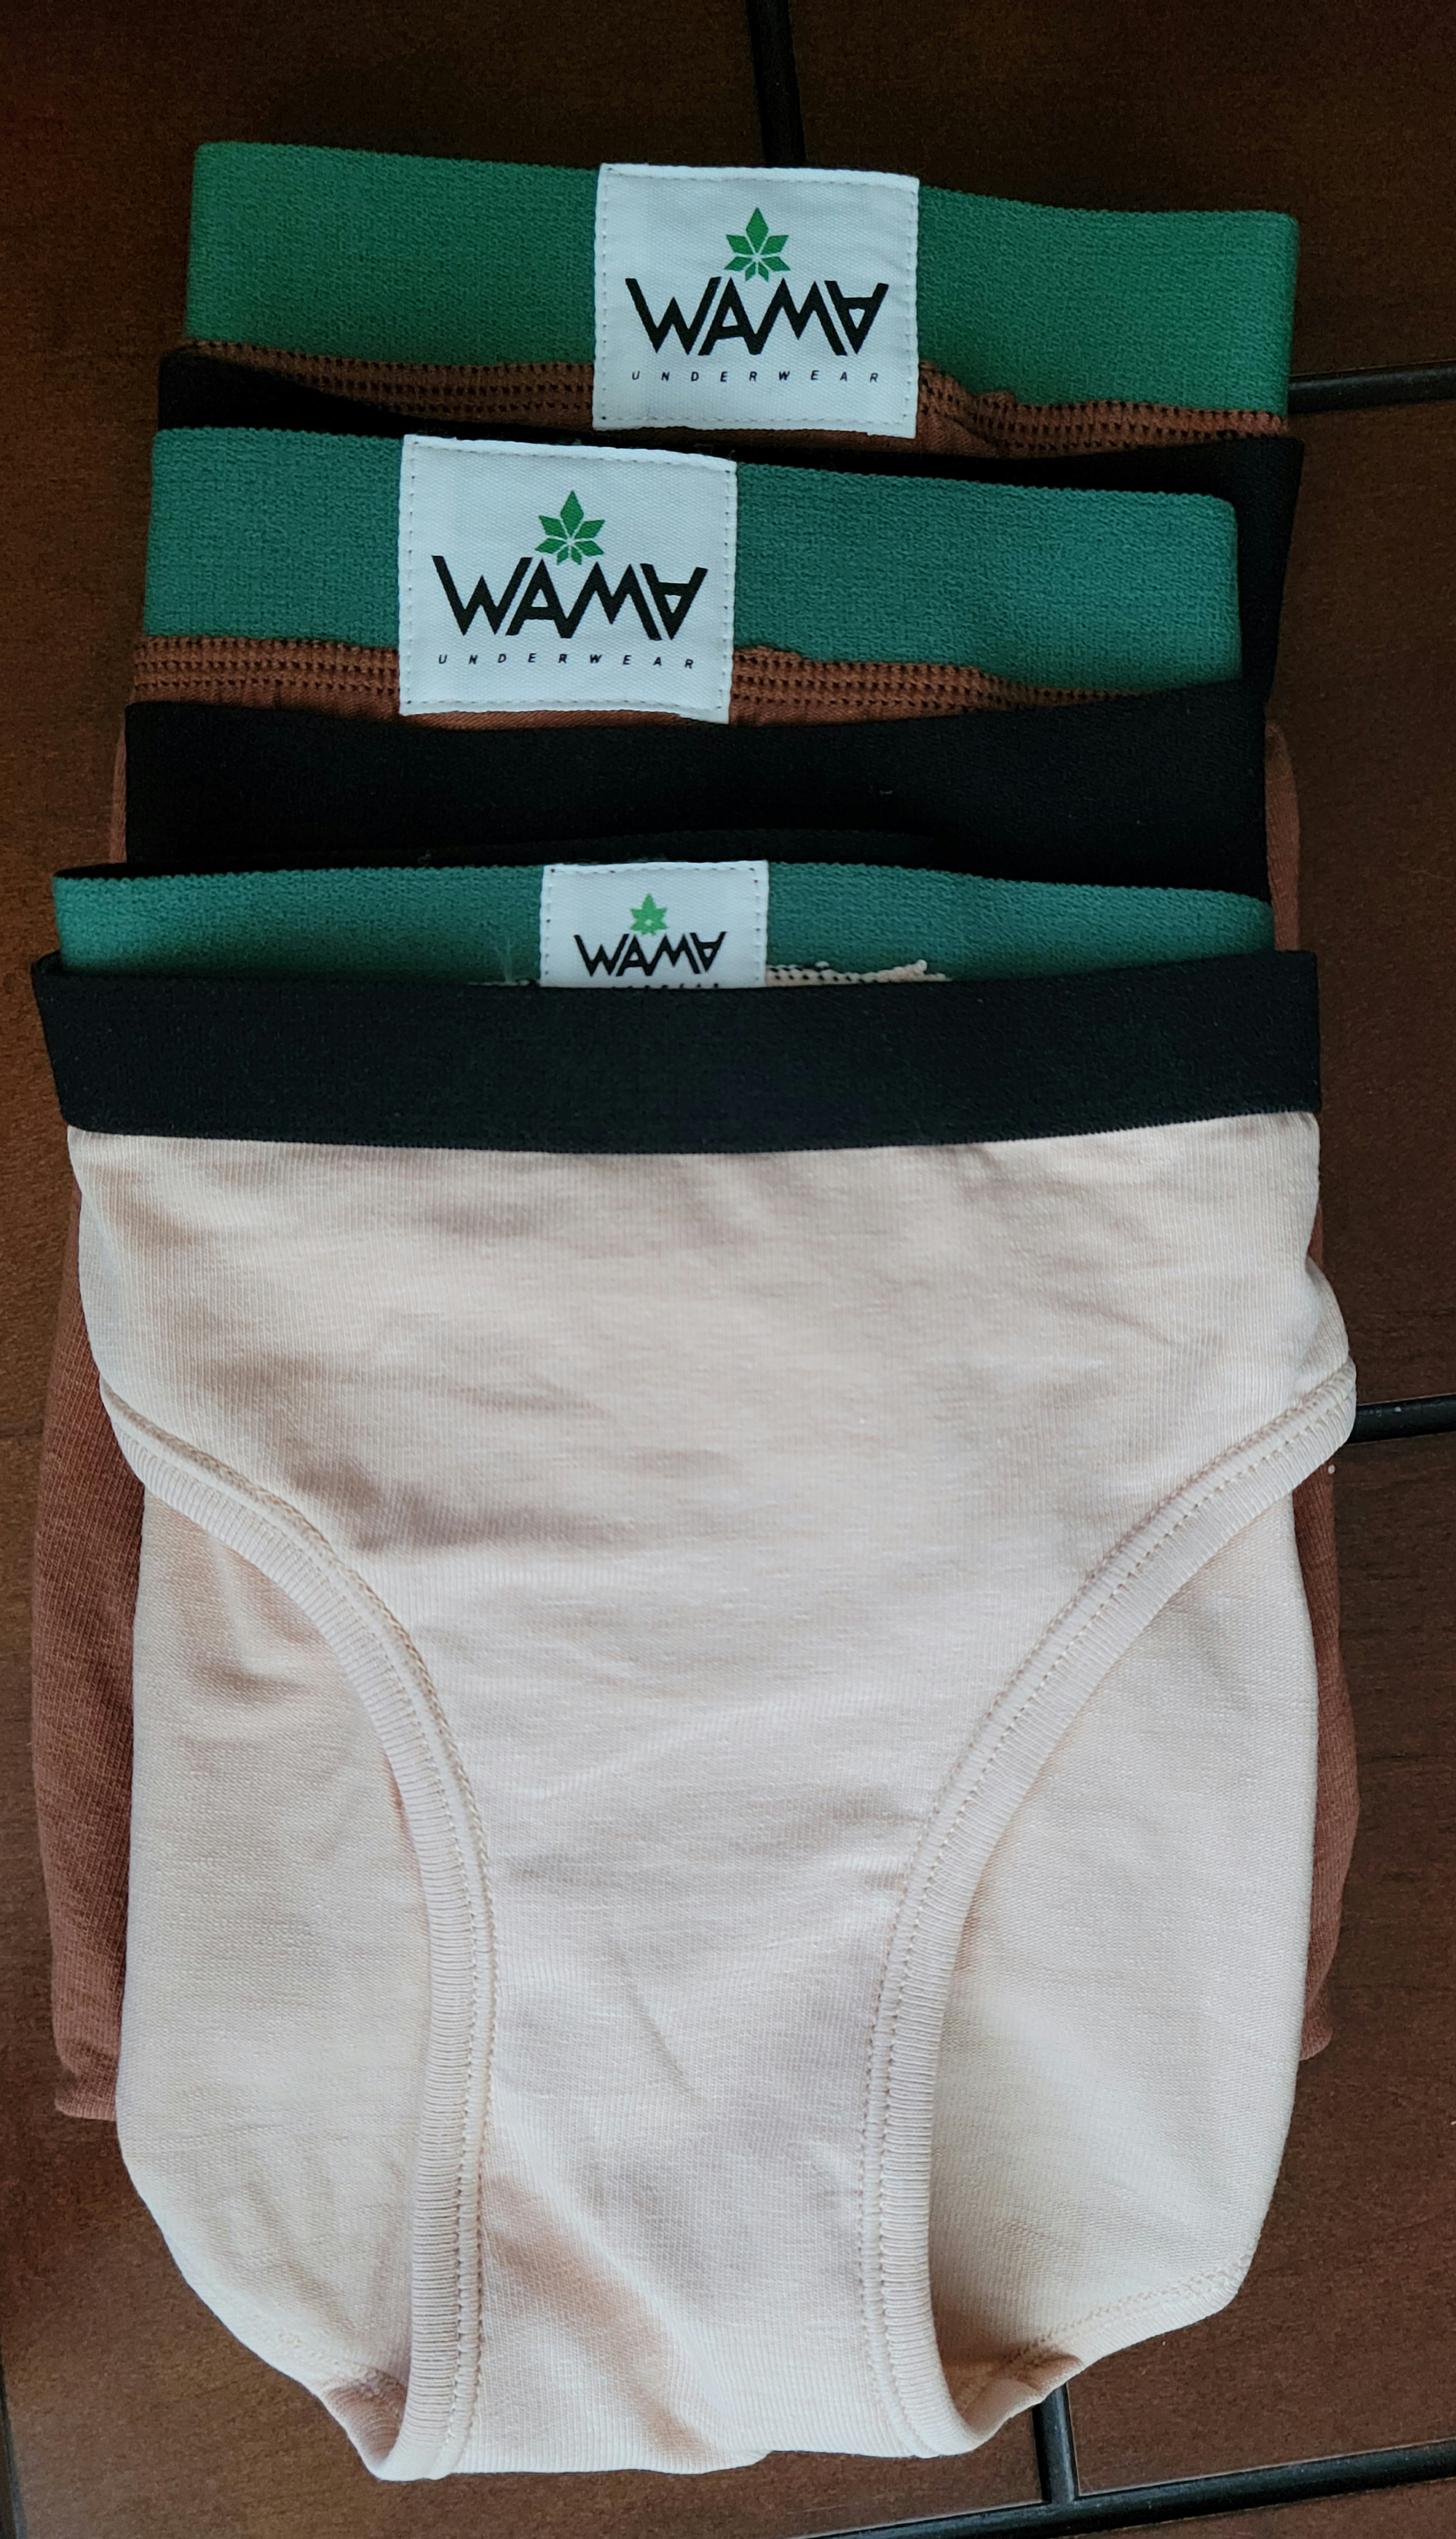 Why You Should Check Out Hemp Underwear by WAMA